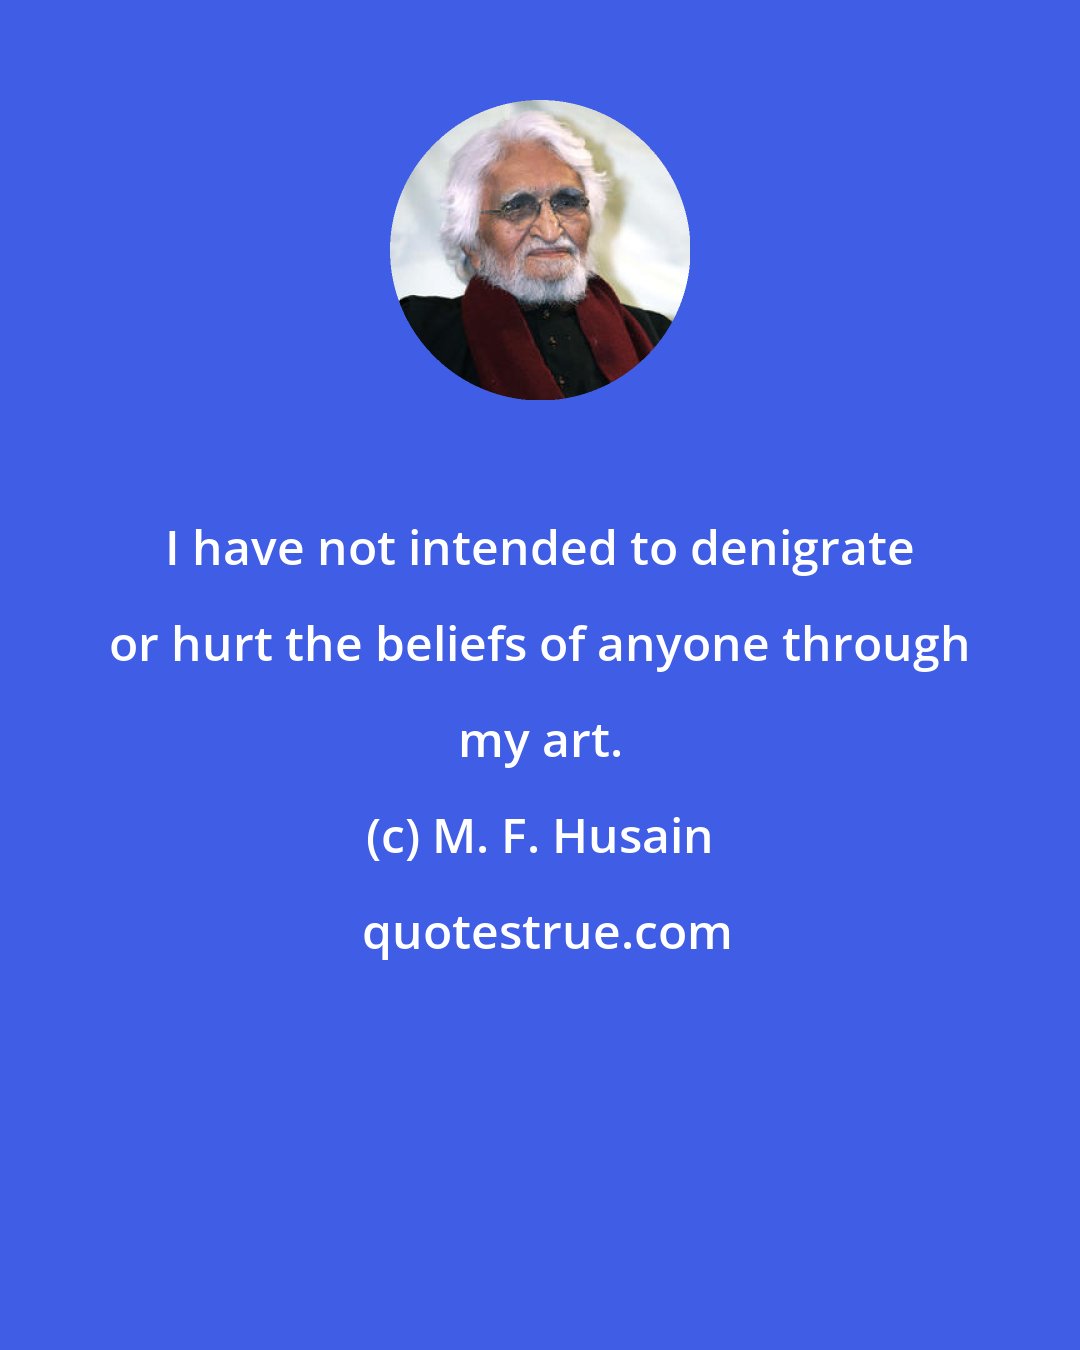 M. F. Husain: I have not intended to denigrate or hurt the beliefs of anyone through my art.